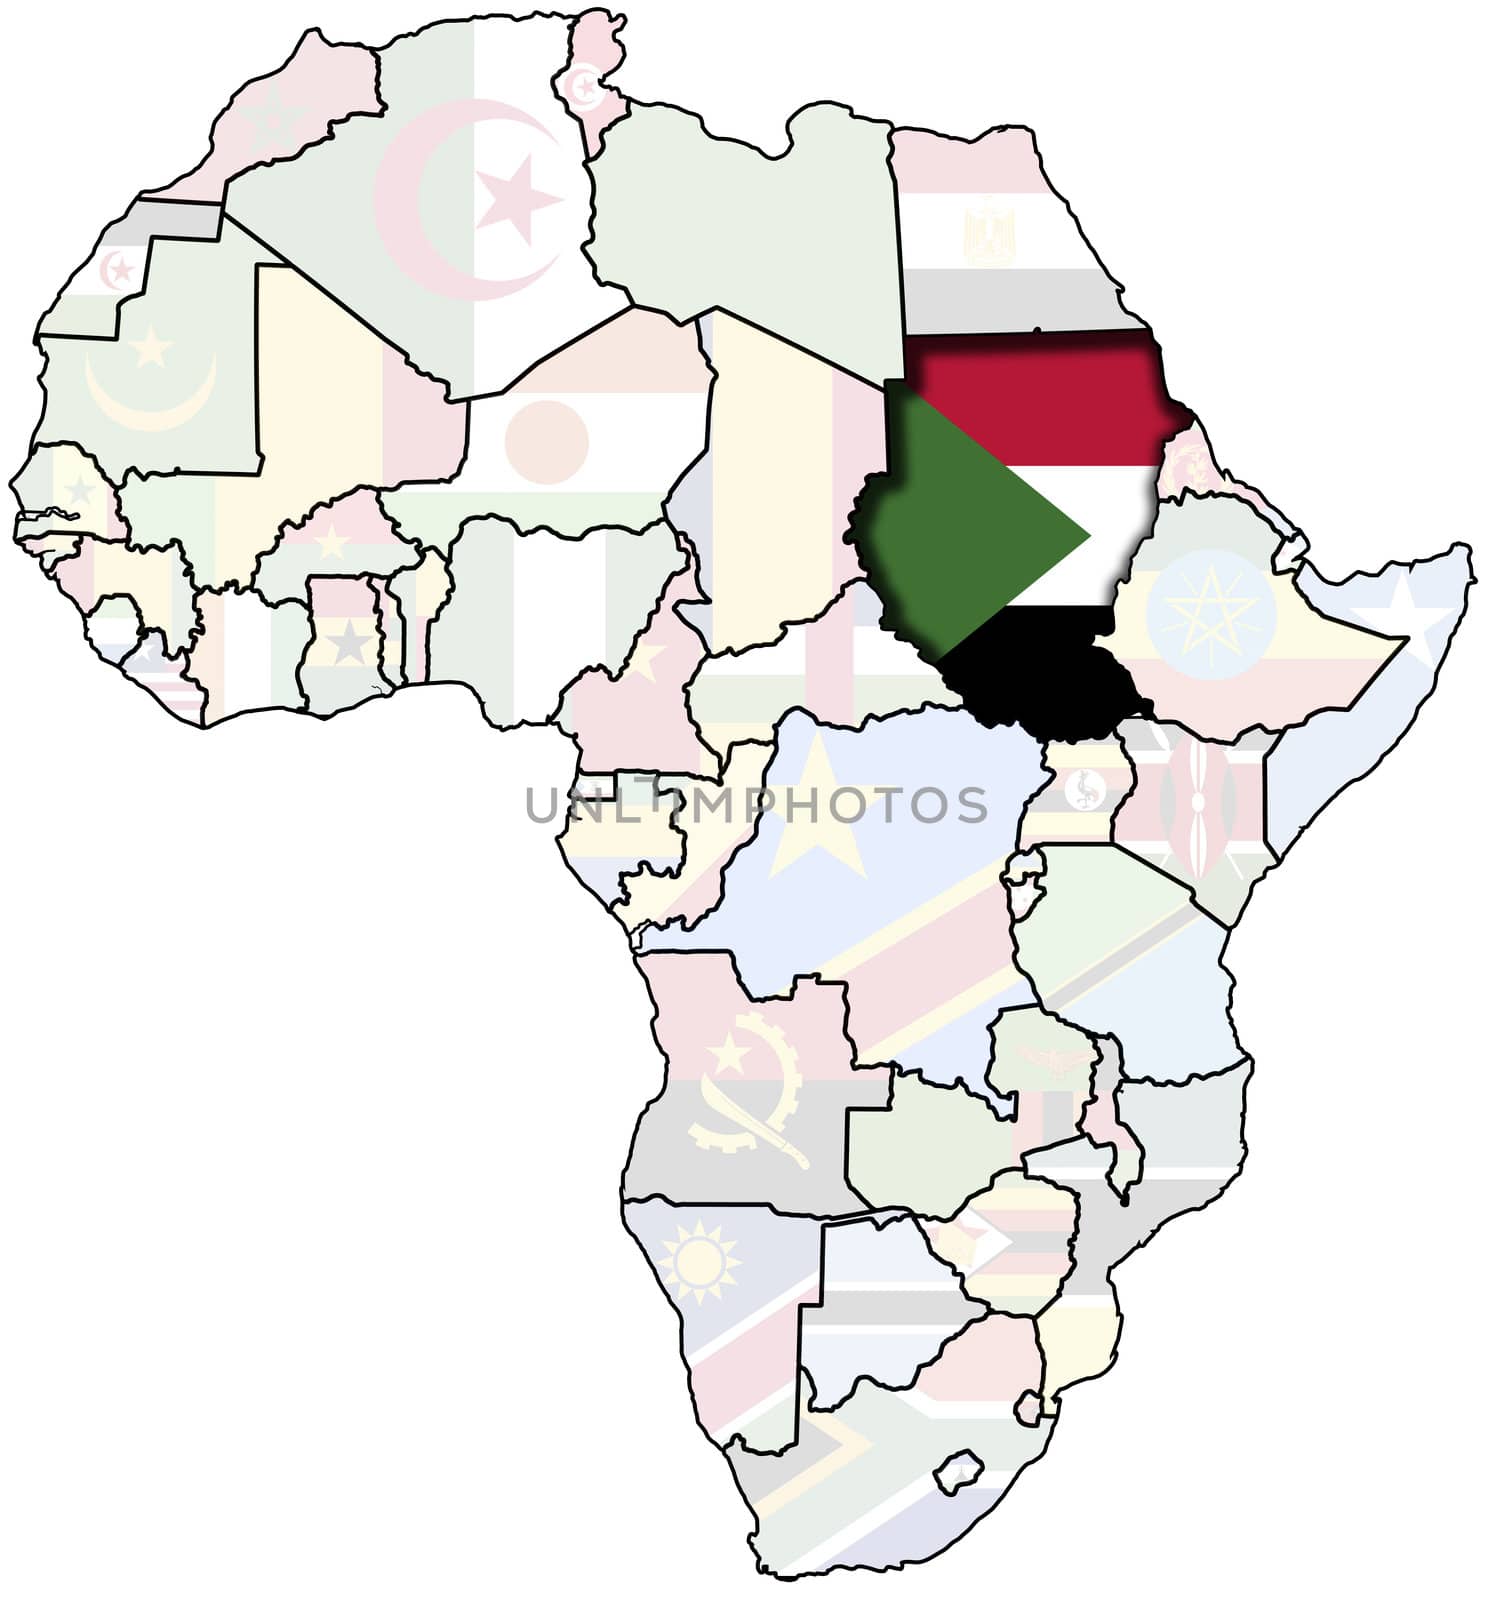 sudan on africa map by michal812